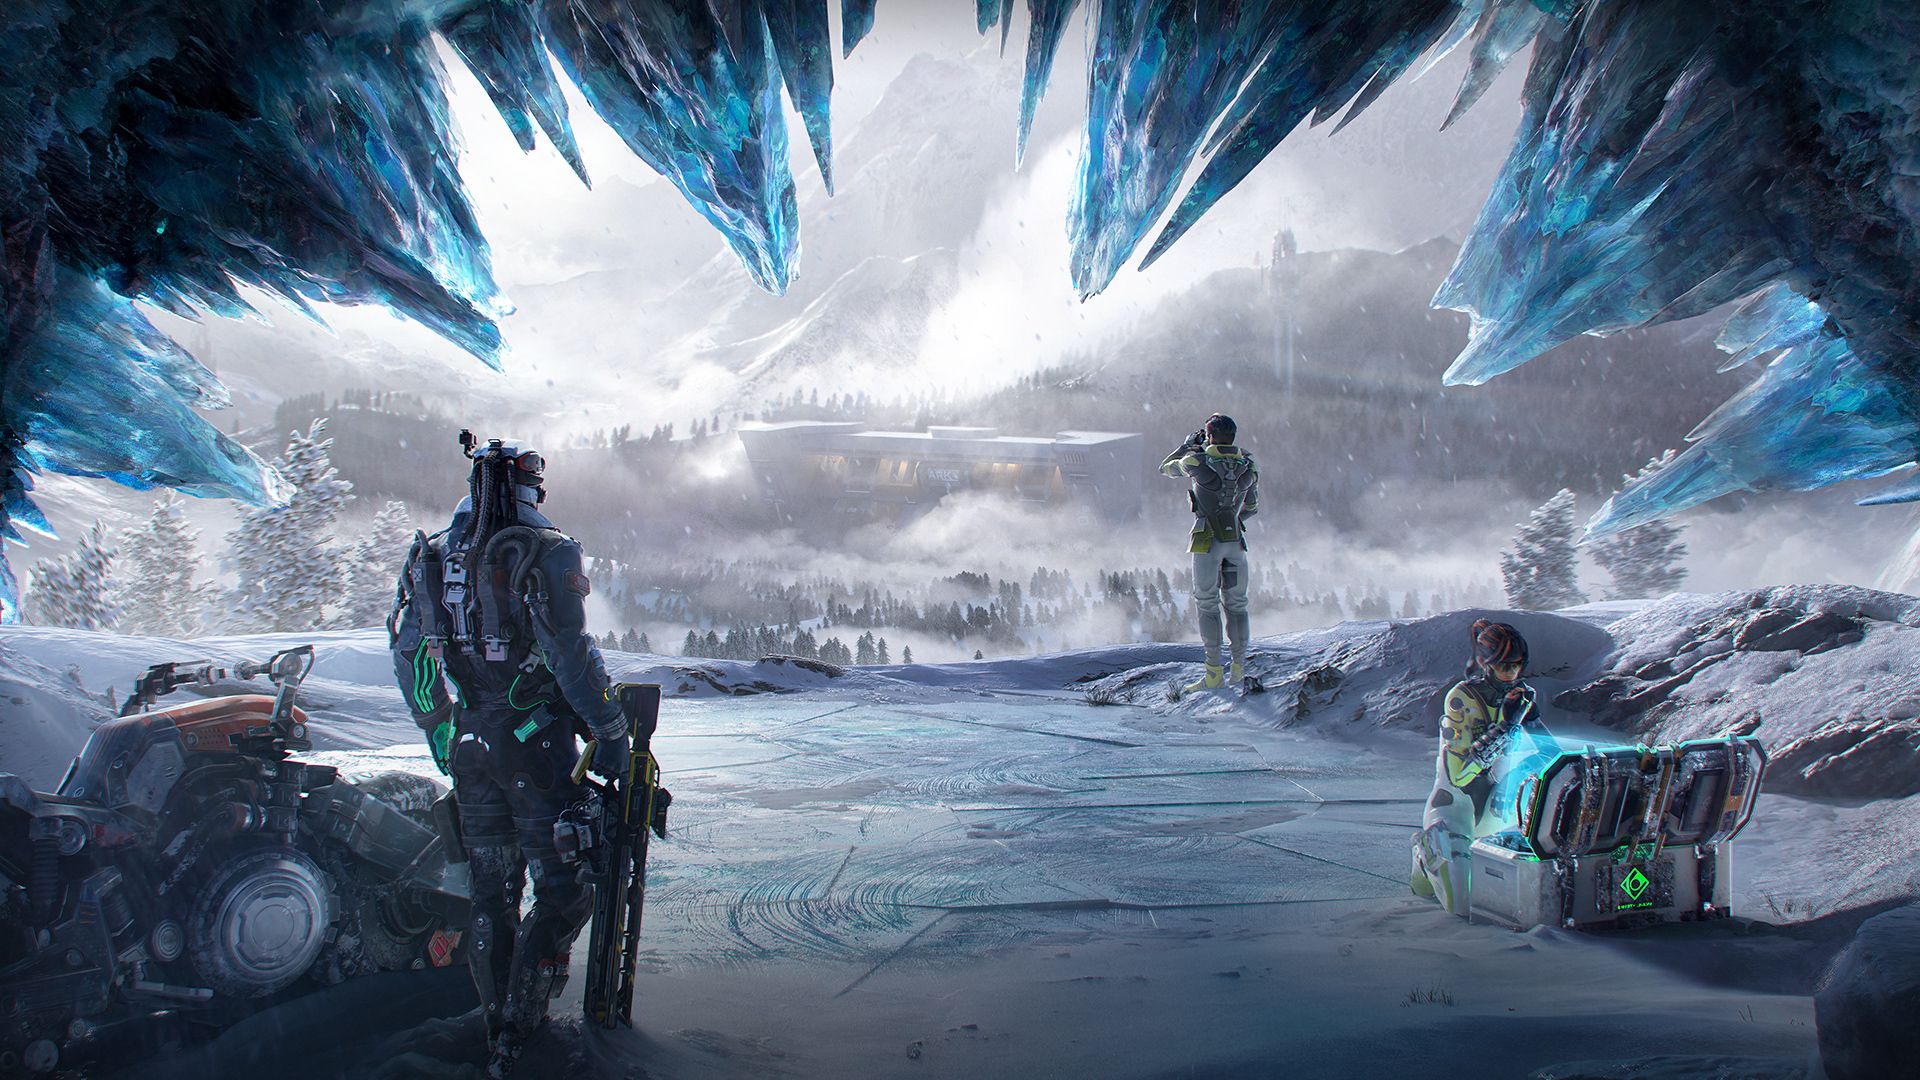 Earth: Revival is a solid MMO and weird survival game: sci-fi explorers search for loot in an icy cave